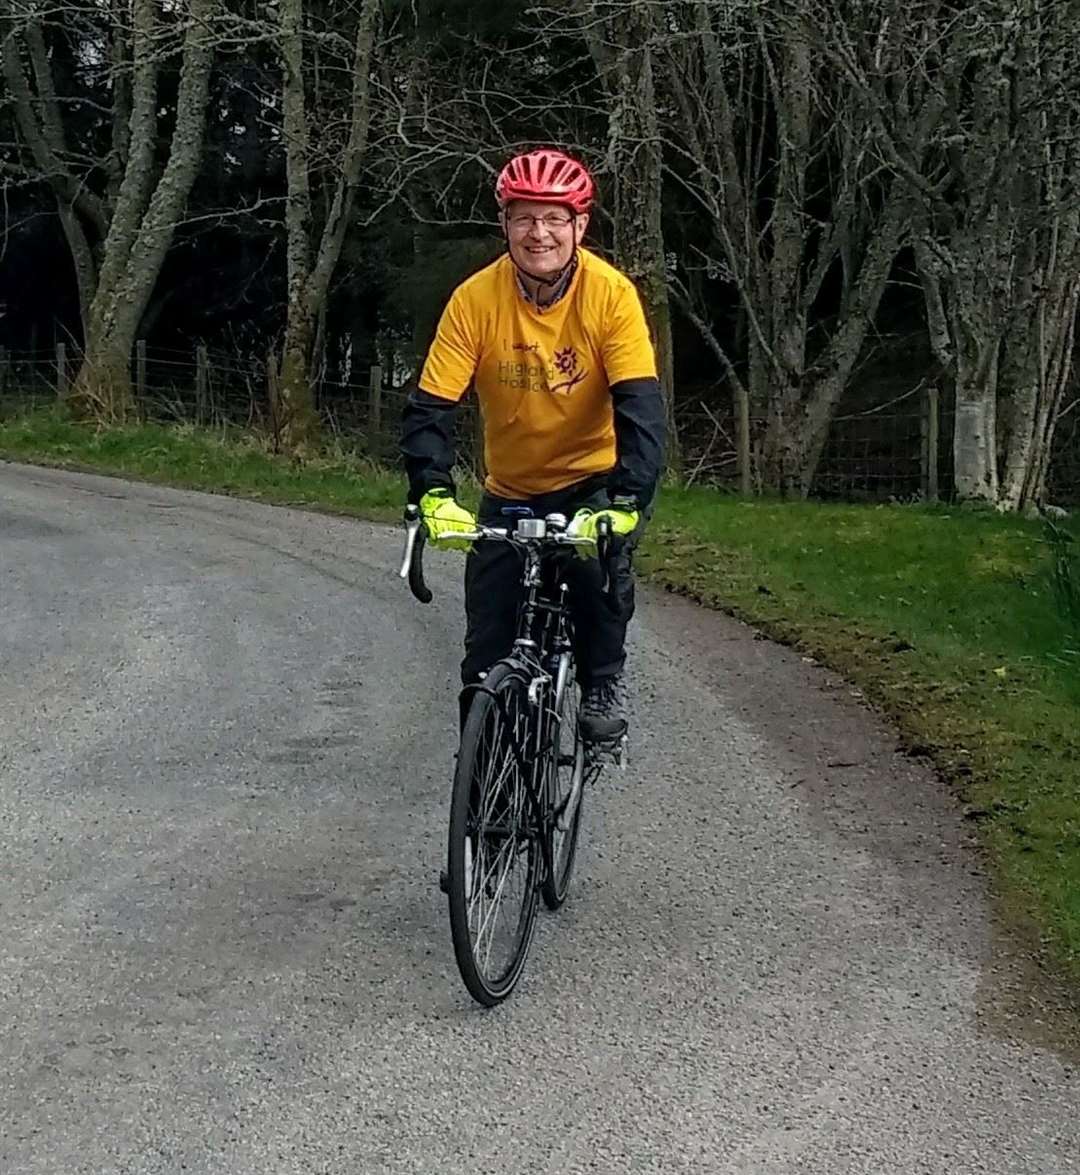 Richard Guest whose wife Jonie who died at Highland Hospice a year ago. He is tackling a 600 mile cycle ride this month in her memory.